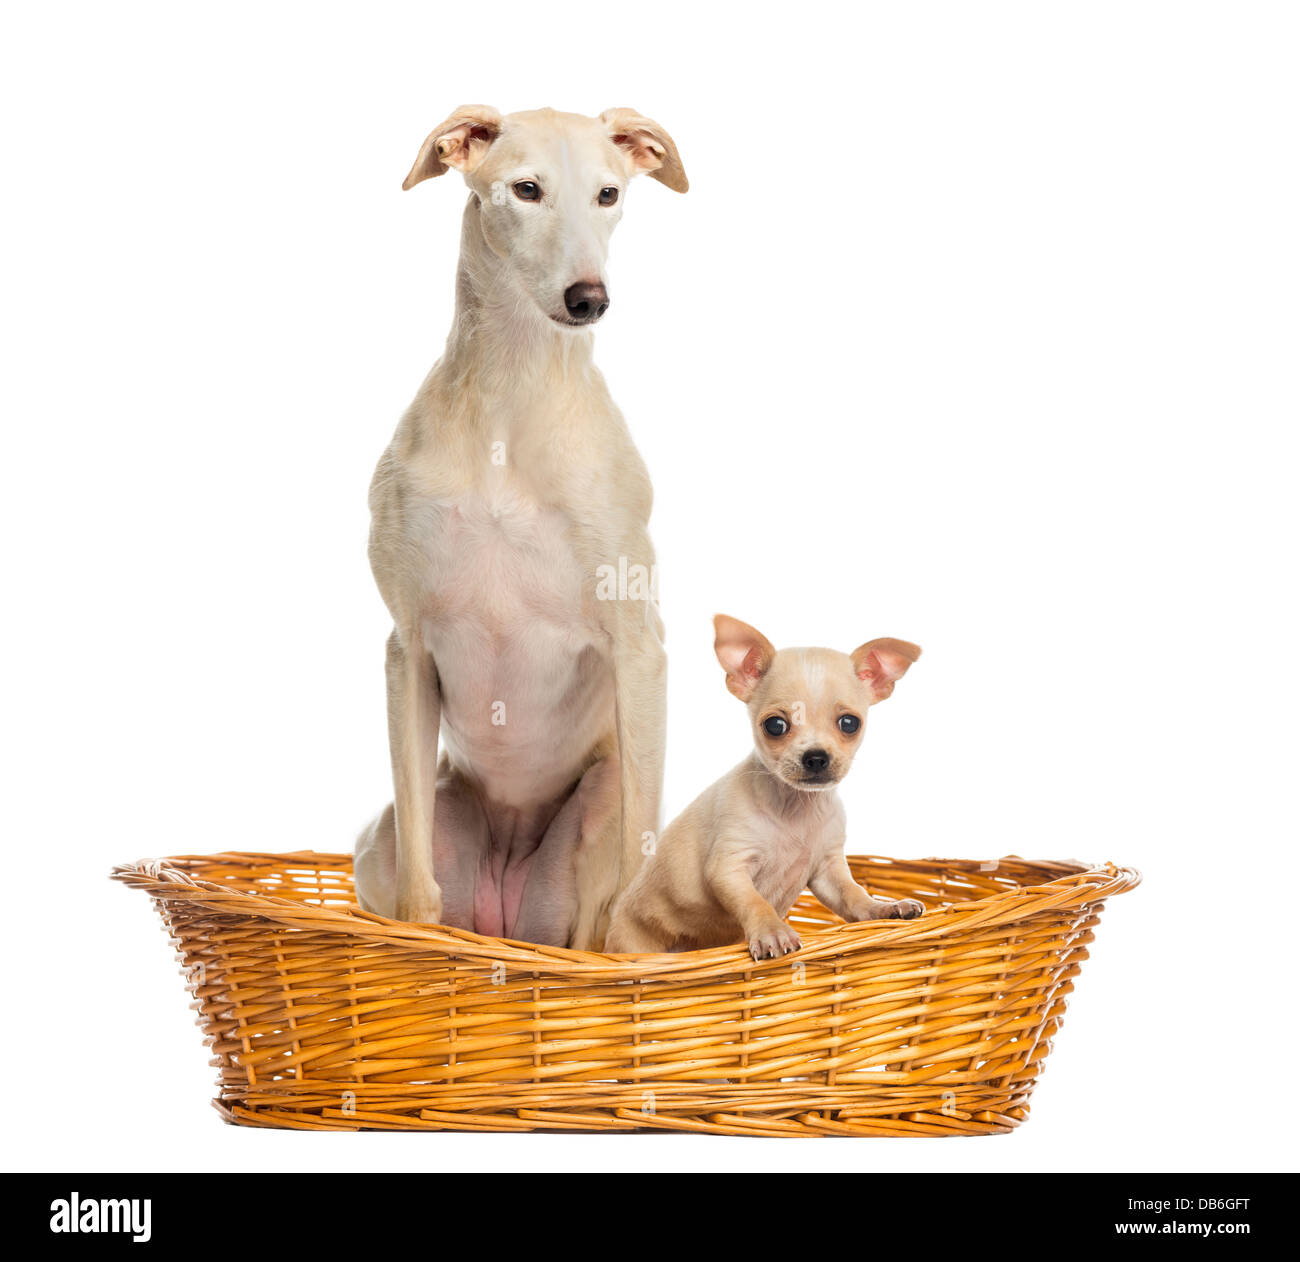 Whippet and Chihuahua puppy in wicker basket against white background Stock Photo